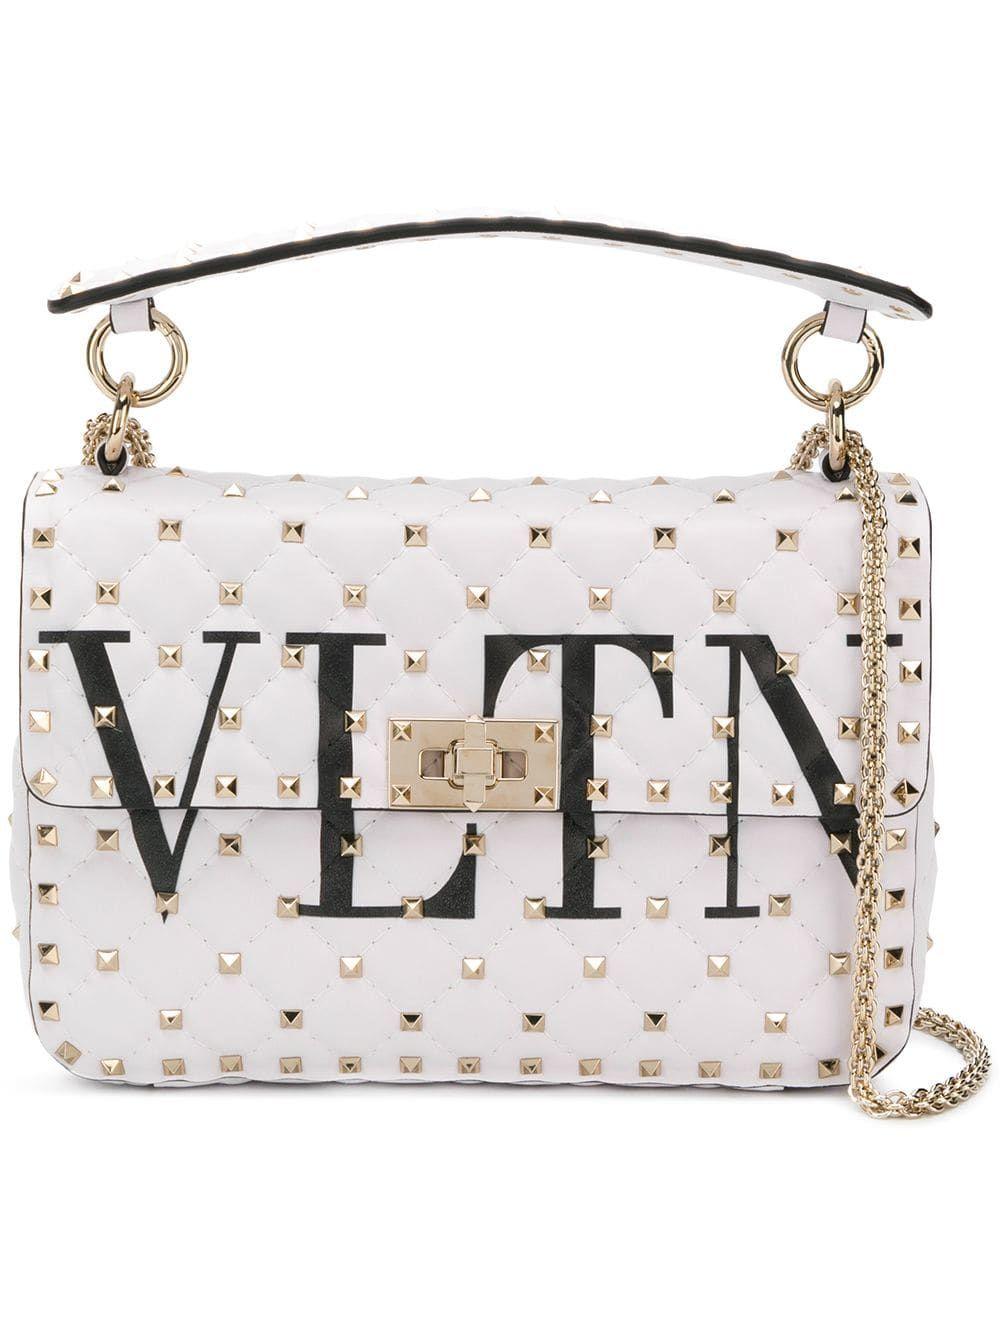 Valentino White Leather Shoulder Bag in White - Lyst